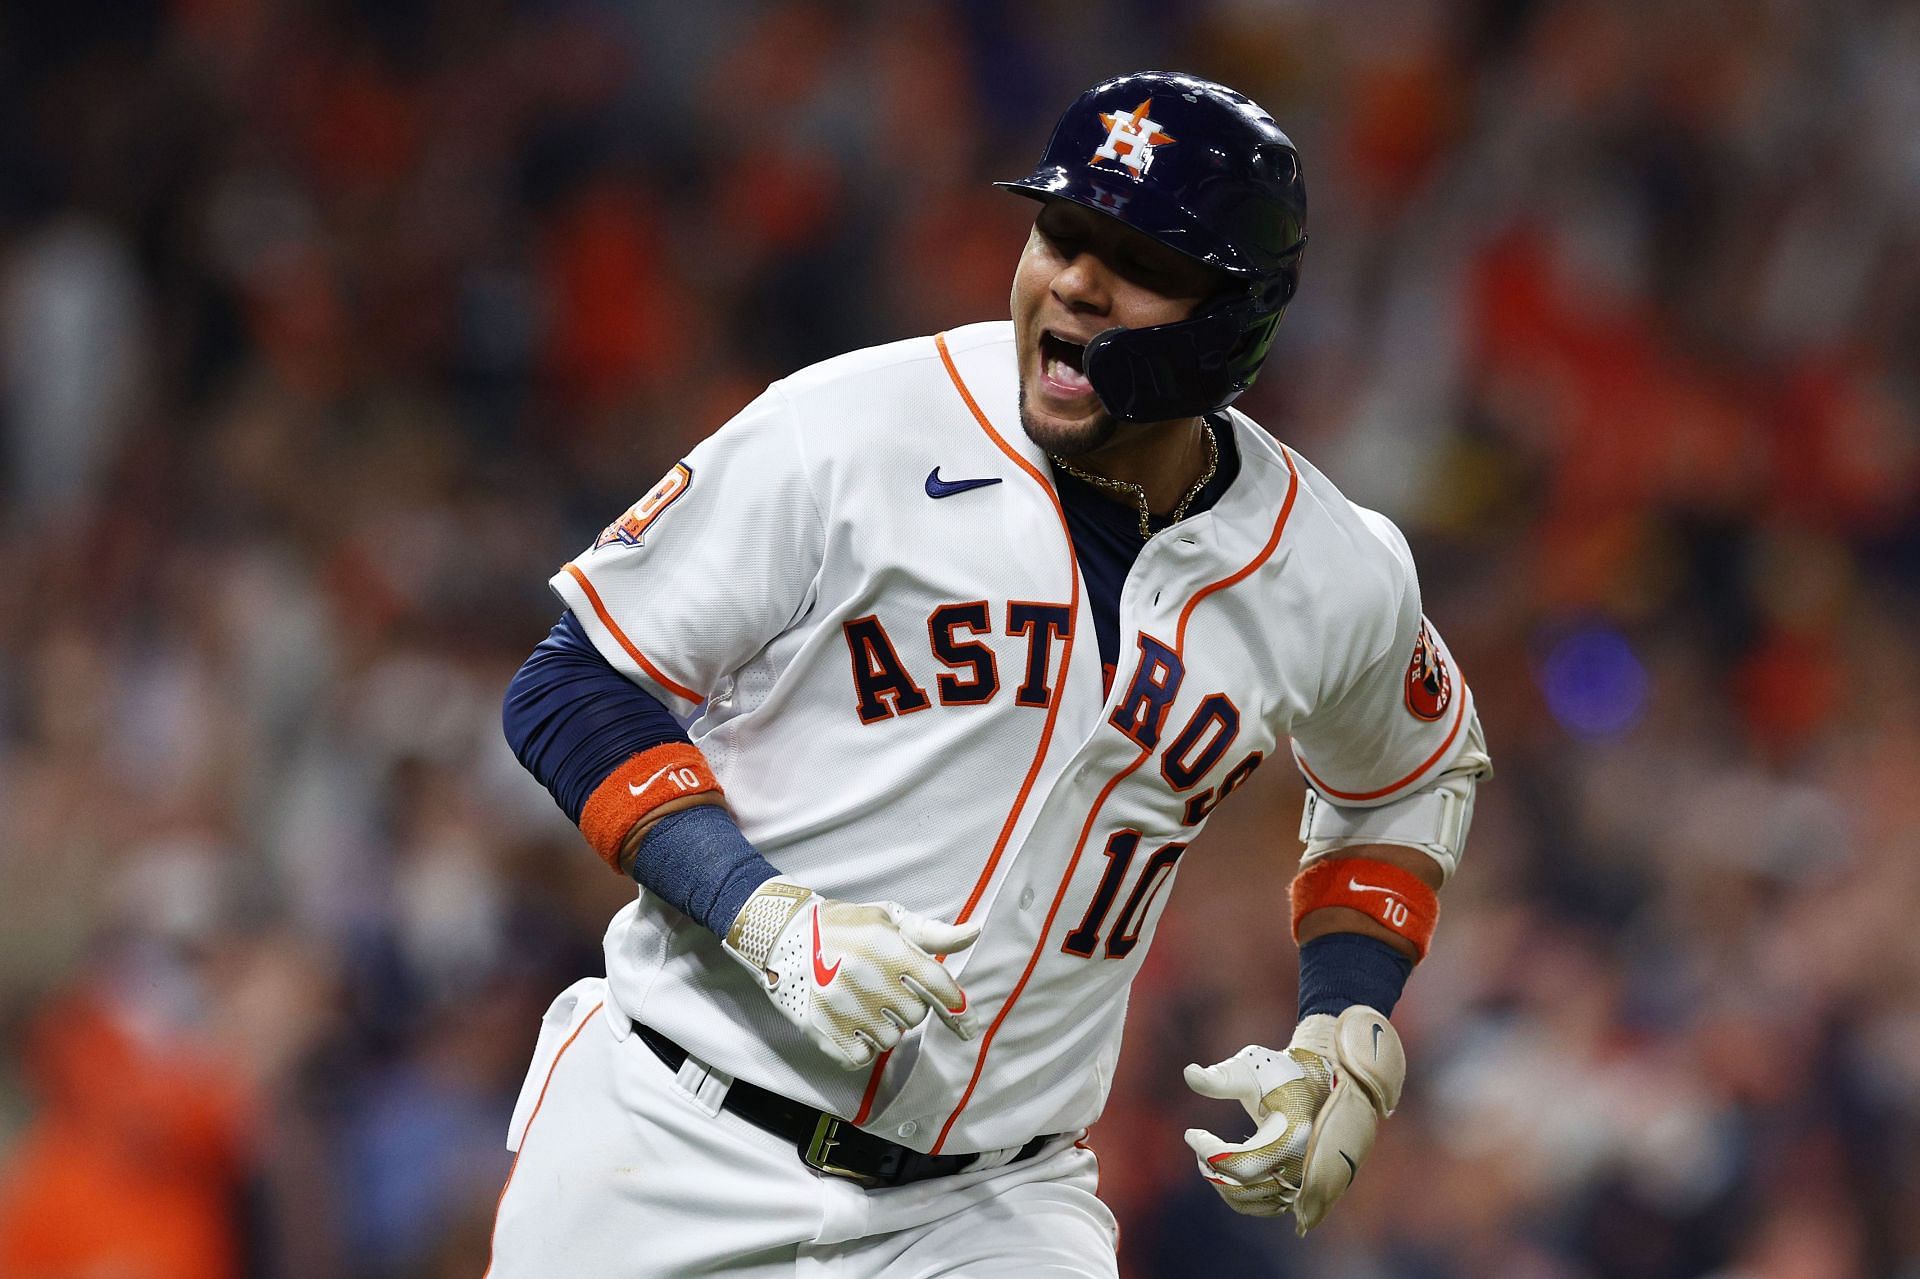 Yuli Gurriel of the Houston Astros celebrates after hitting a